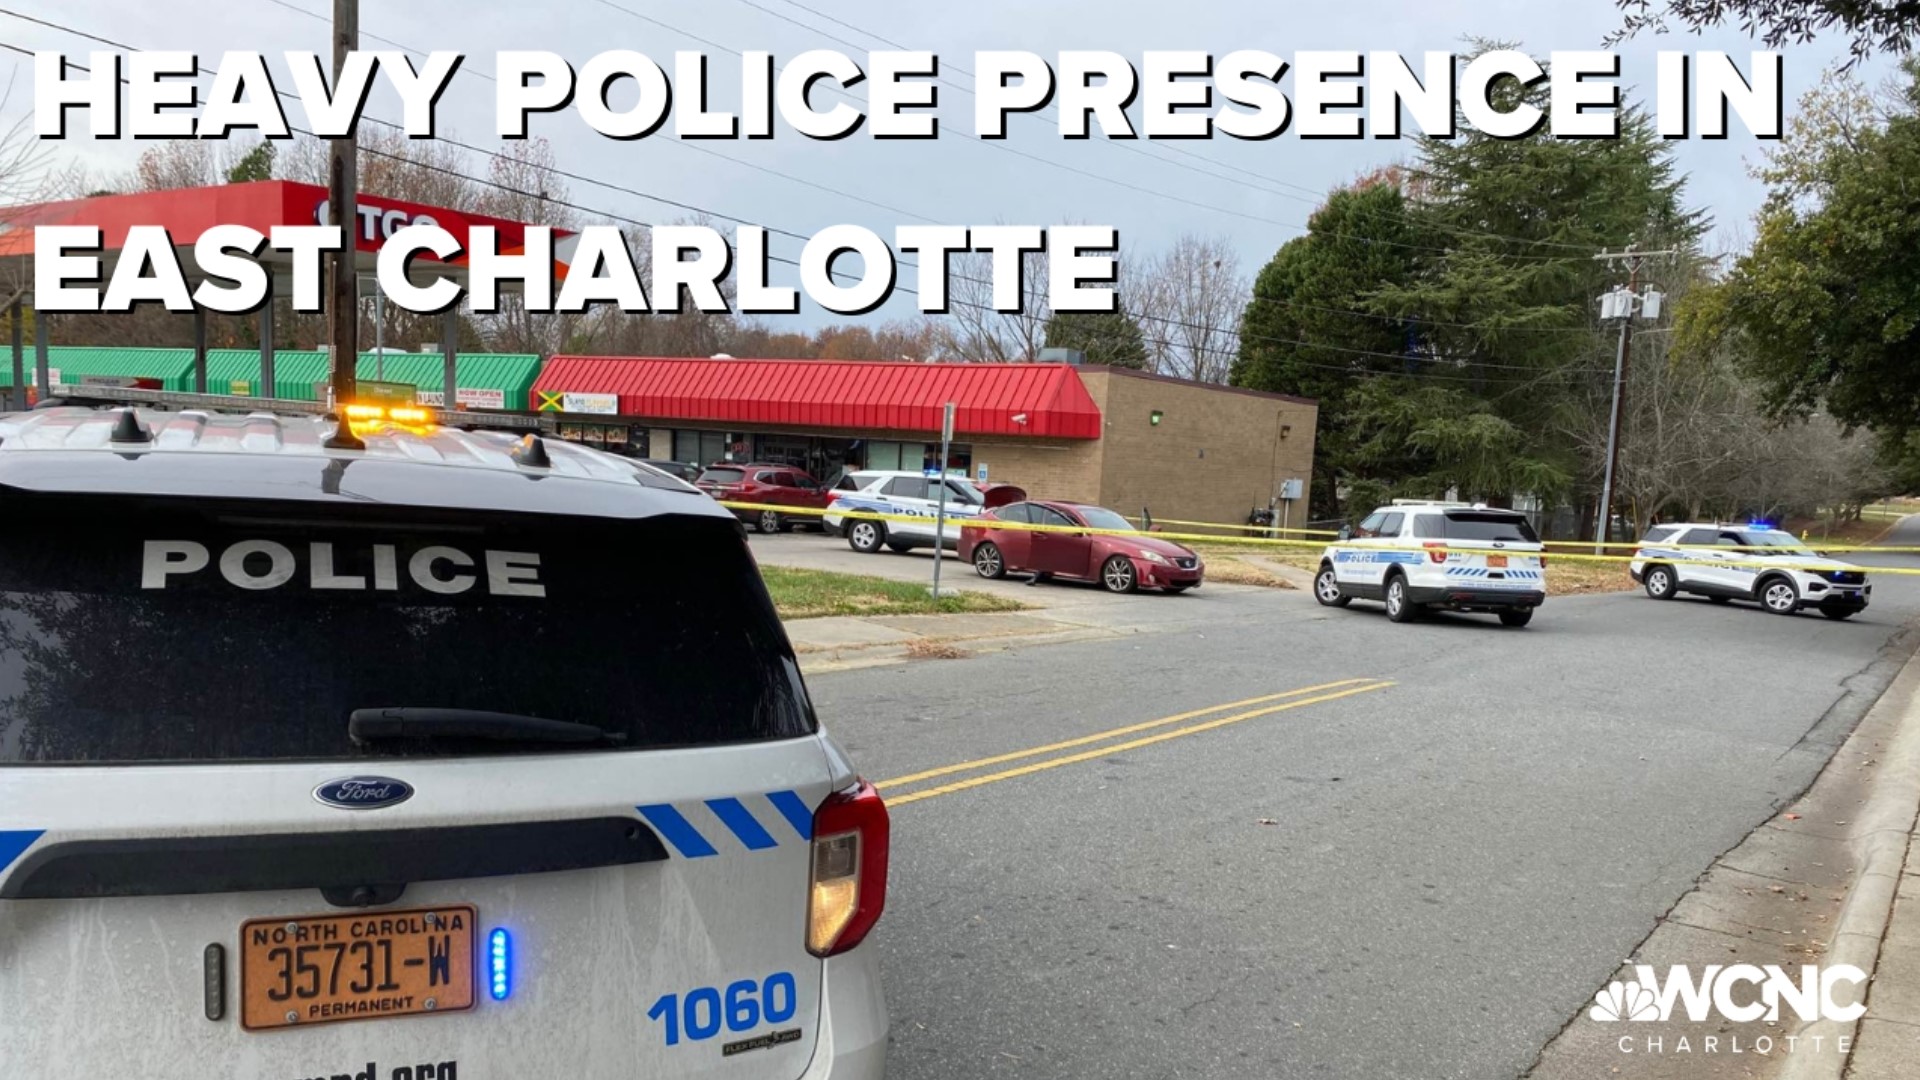 Heavy police presence at east Charlotte shopping center